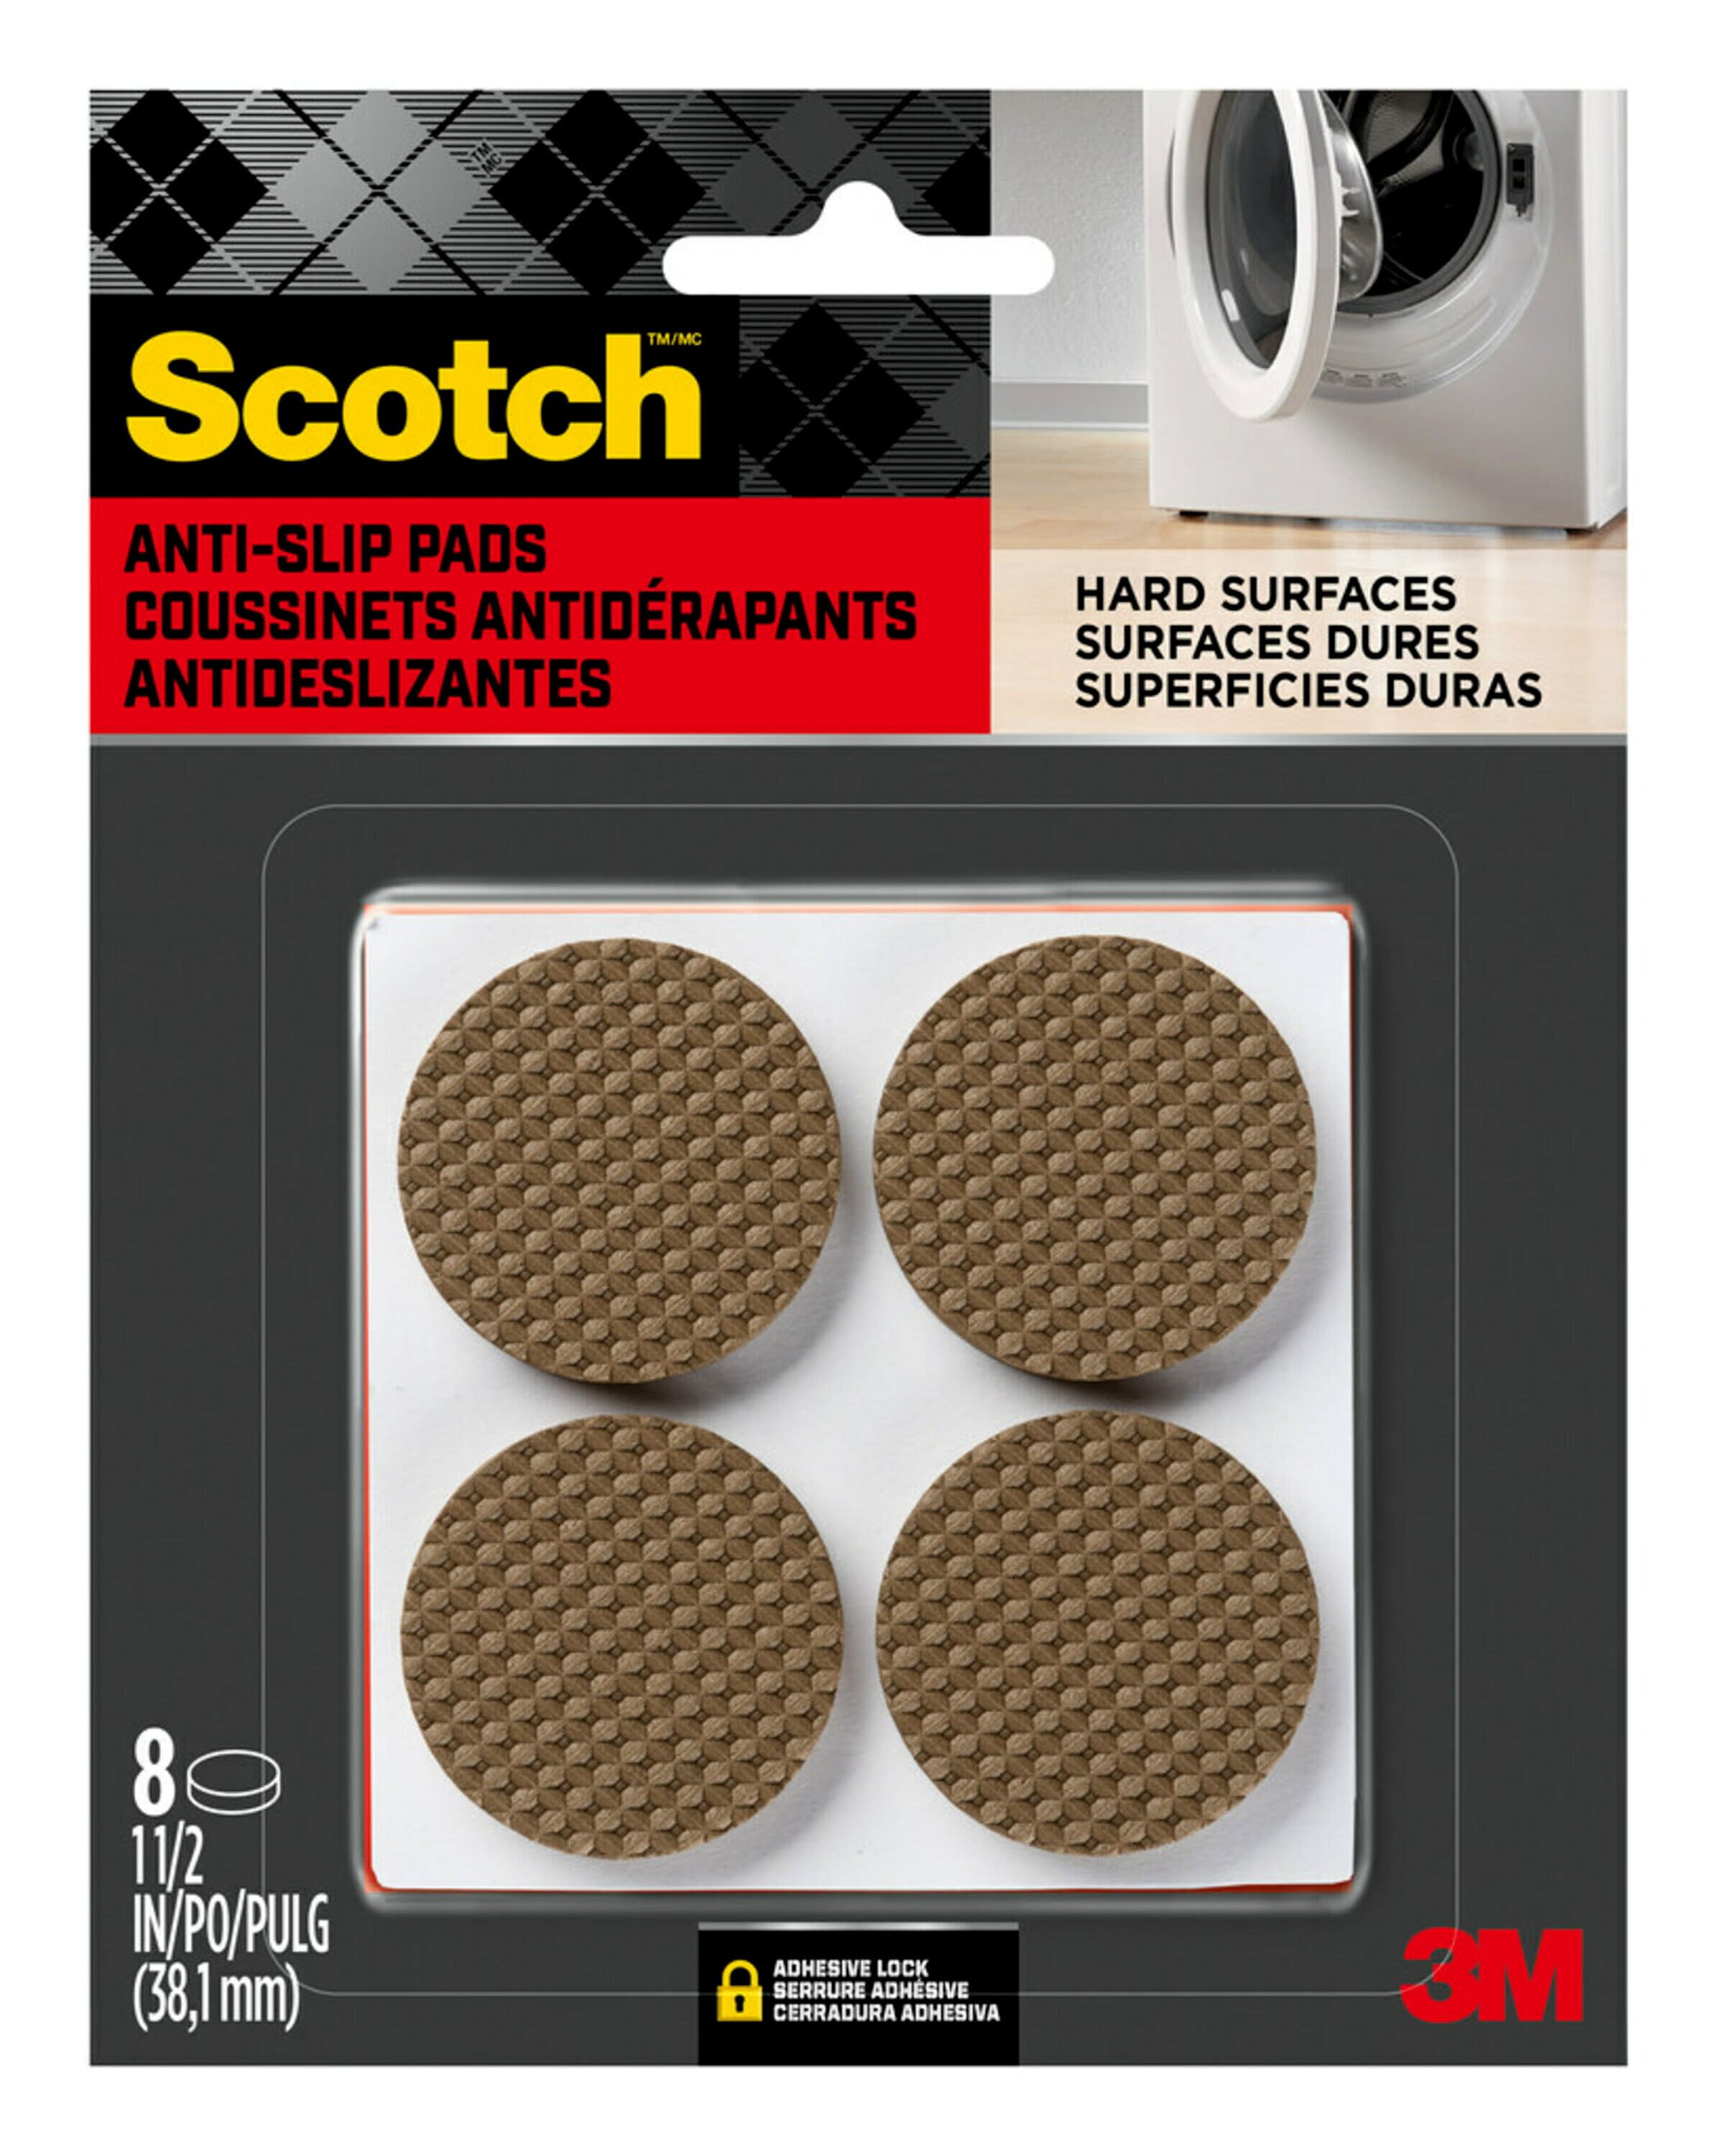 Scotch Gripping Pads, 1.5 in. Diameter, Brown, 8 Non-Slip Pads